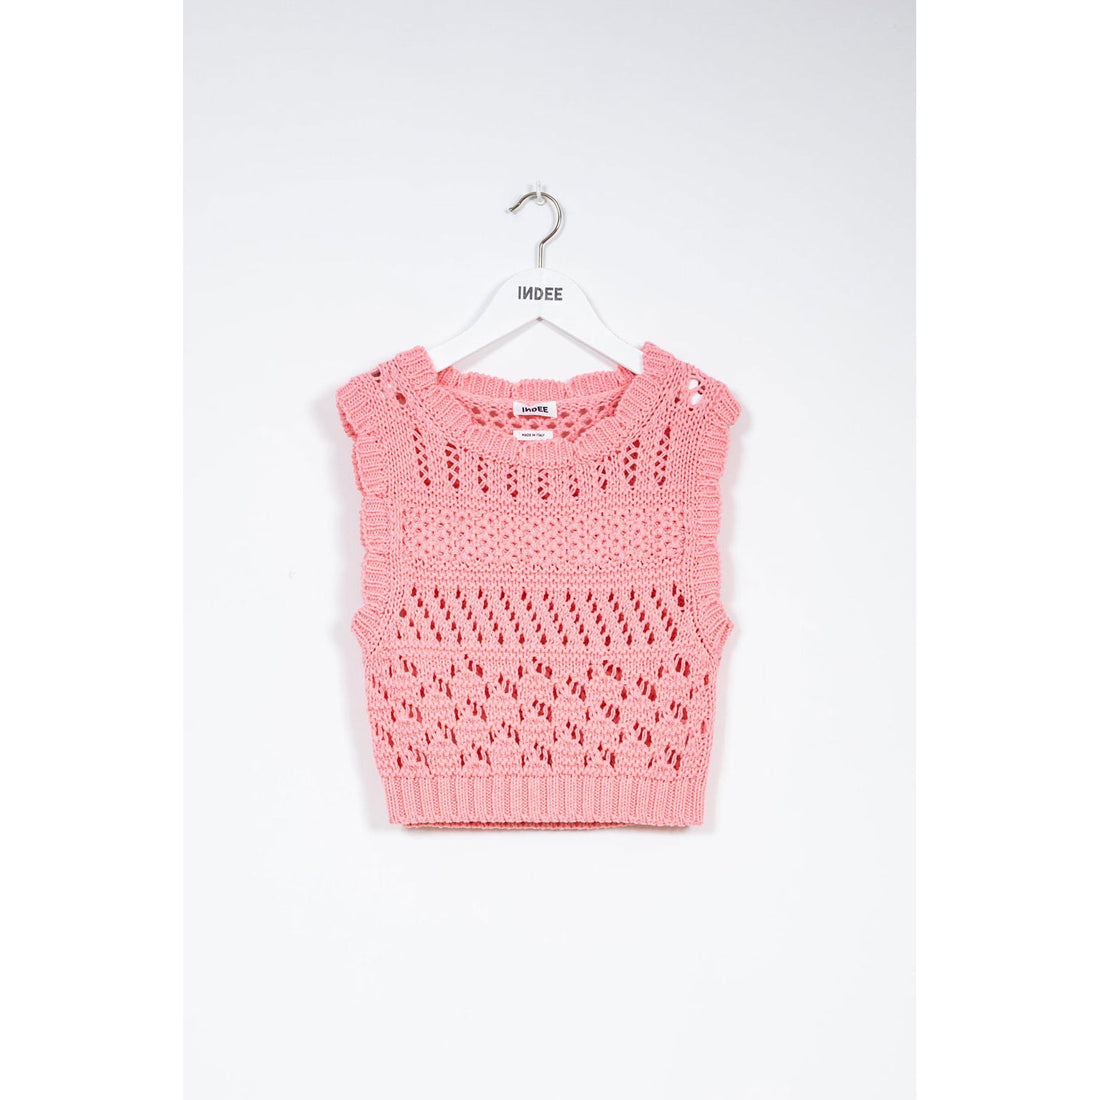 Indee Candy Pink Crochet Tank Top